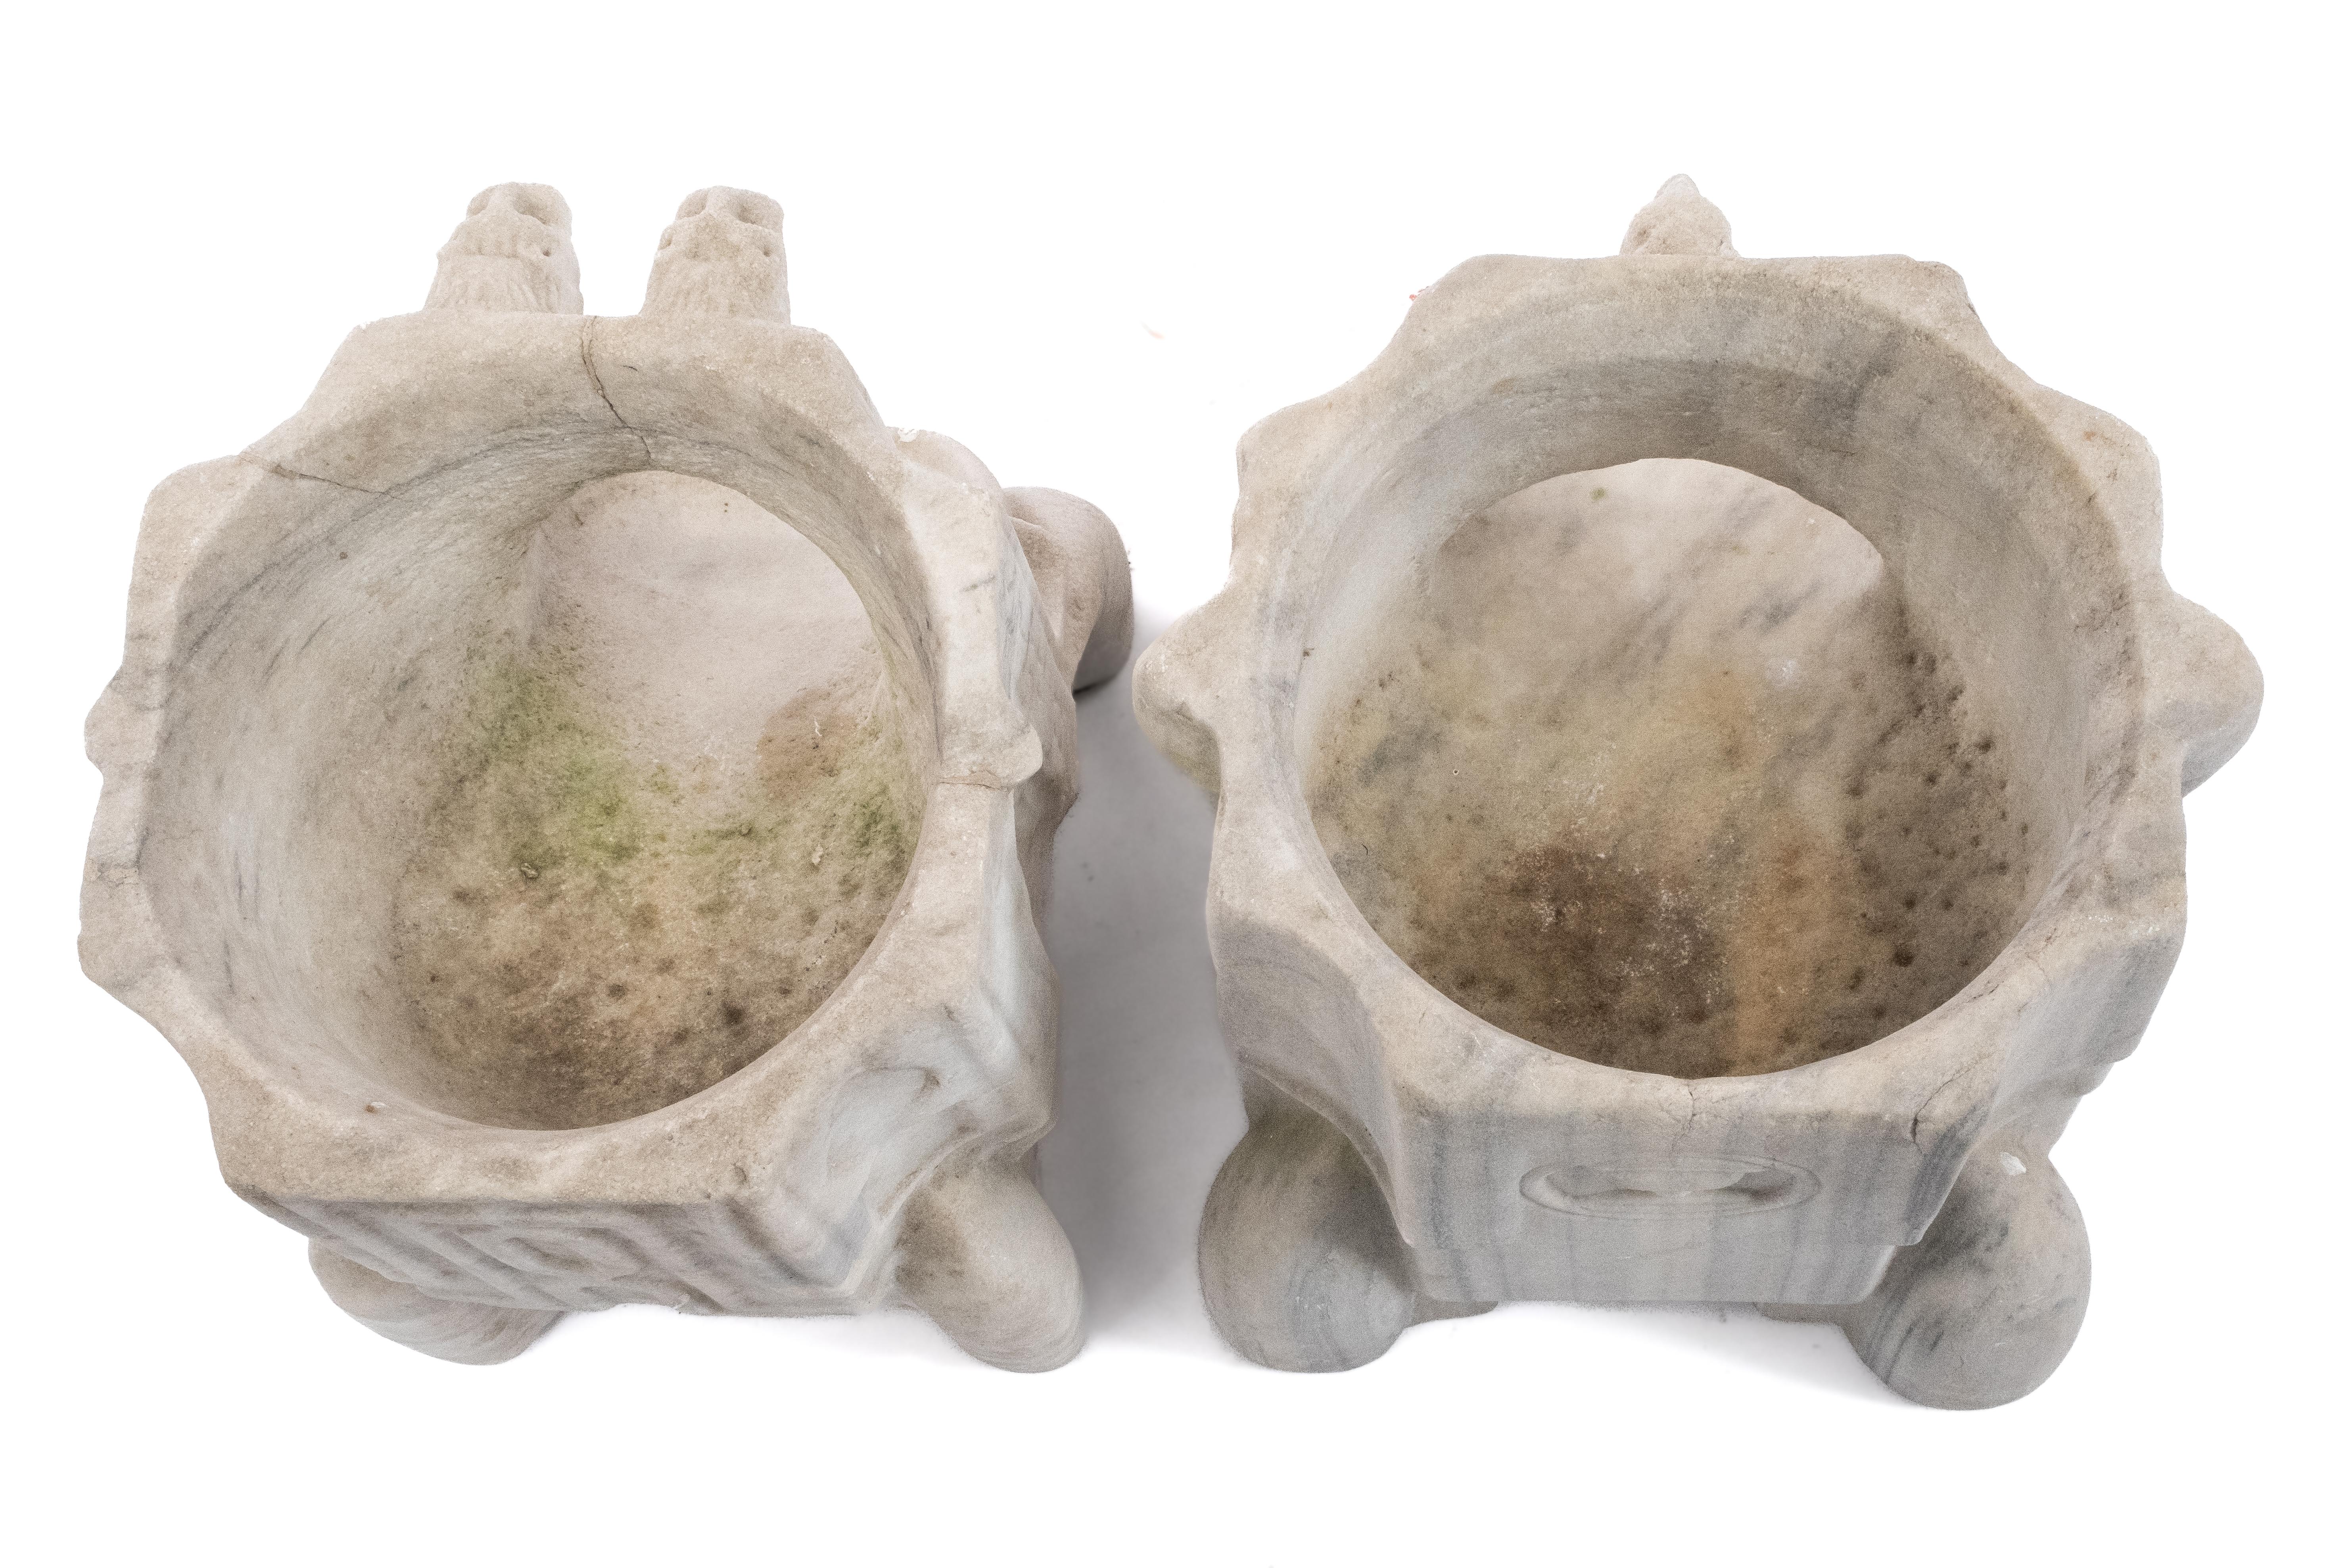 Two Fatimid marble jar stands (kilgas) - Image 4 of 4